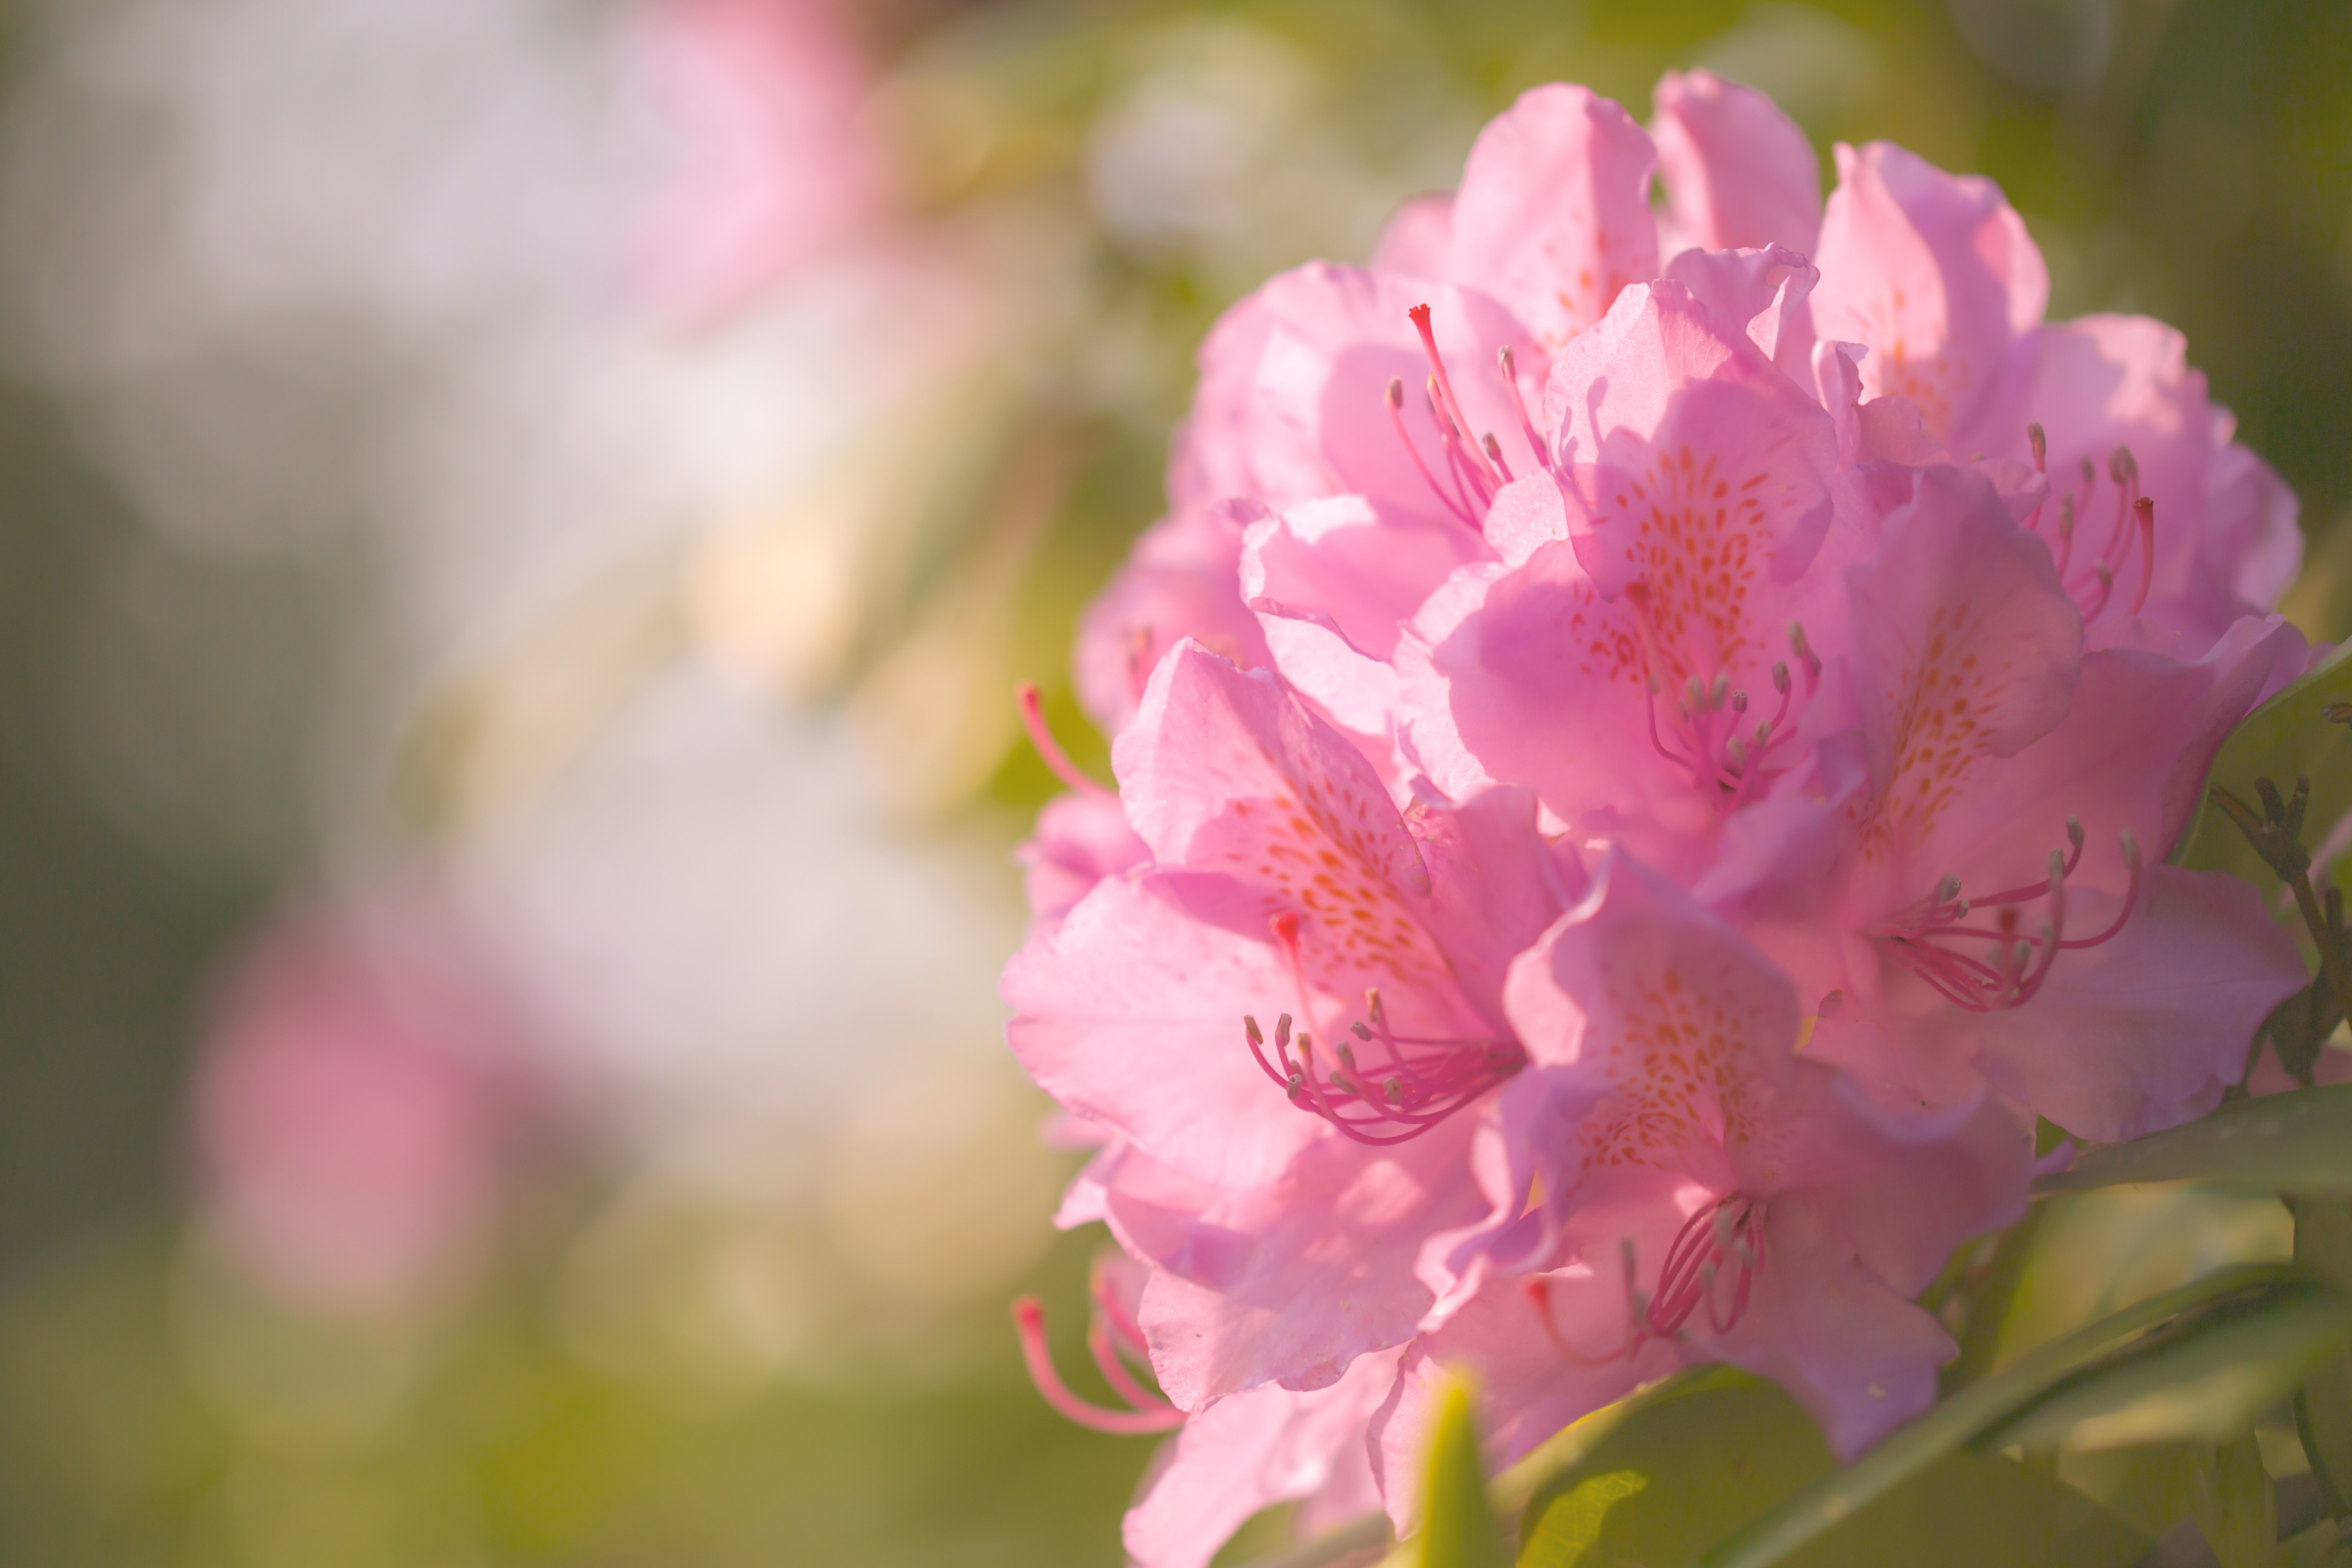 earth, rhododendron, blur, flower, nature, pink flower, flowers